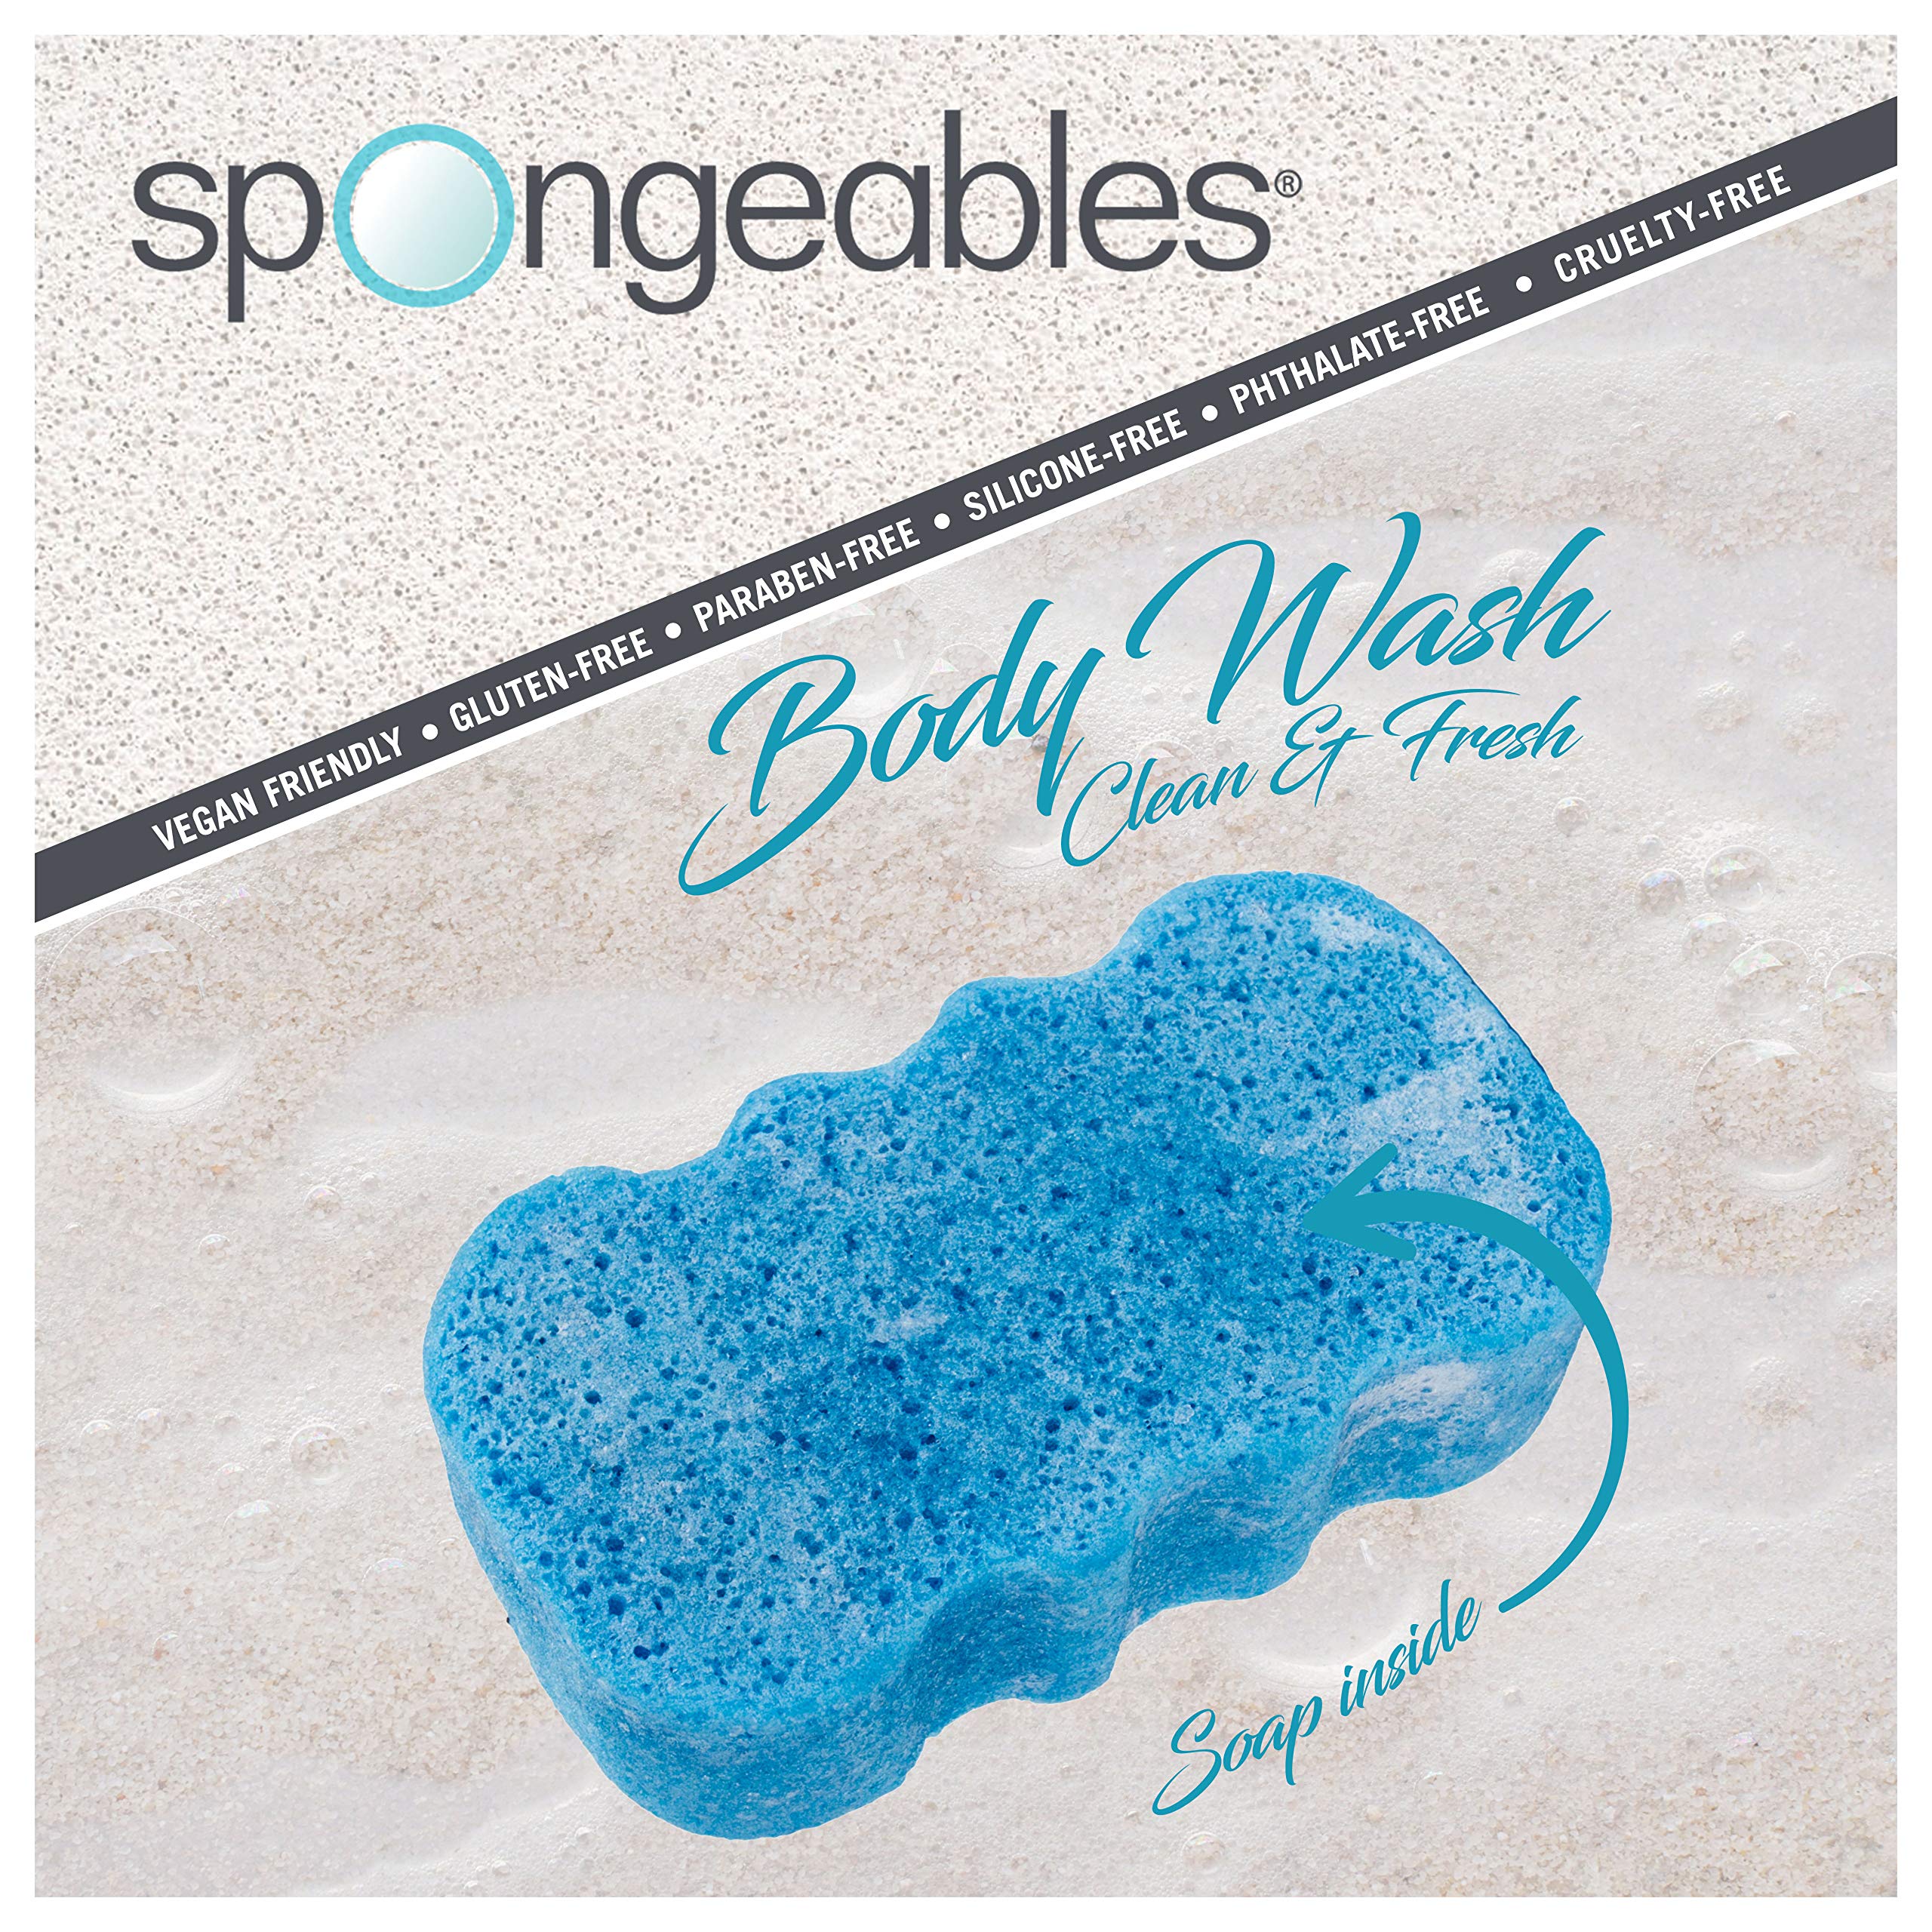 Spongeables Body Wash in a Sponge, Clean & Fresh Scent, Moisturizer for the Body, 3.5 Ounce, 20 + washes